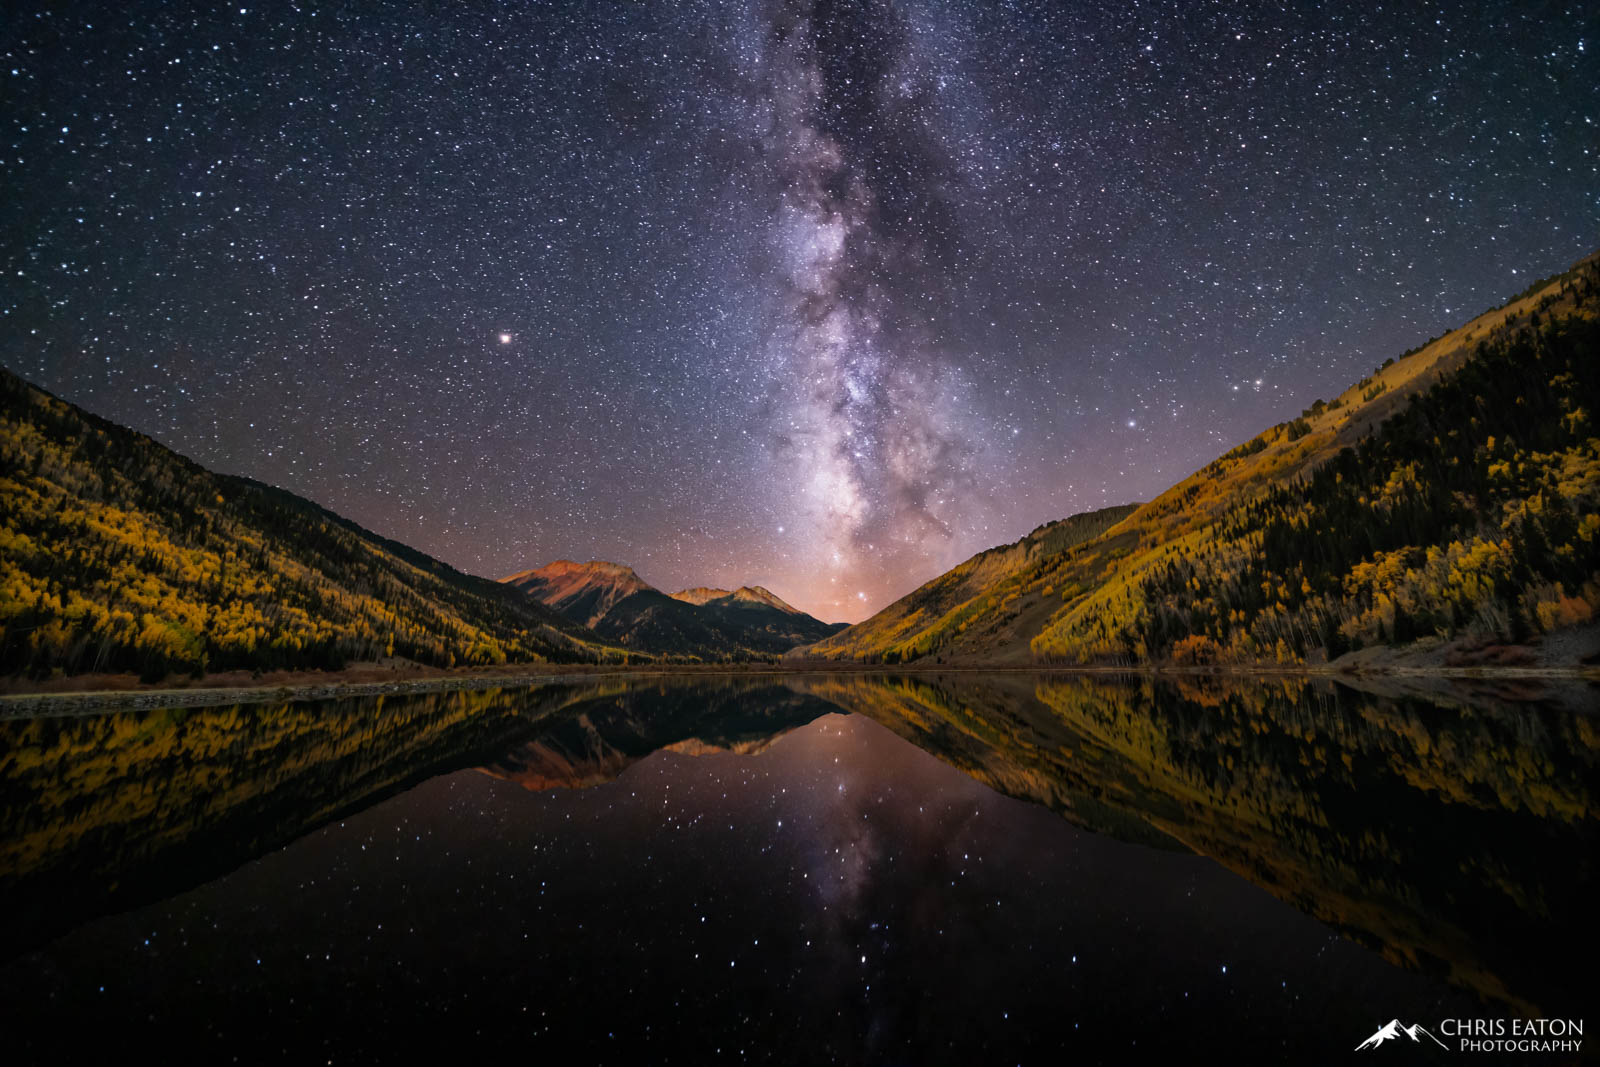 The Milky Way galaxy rises above Crystal Lake and fall color aspen trees in the San Juan Mountains of Colorado.